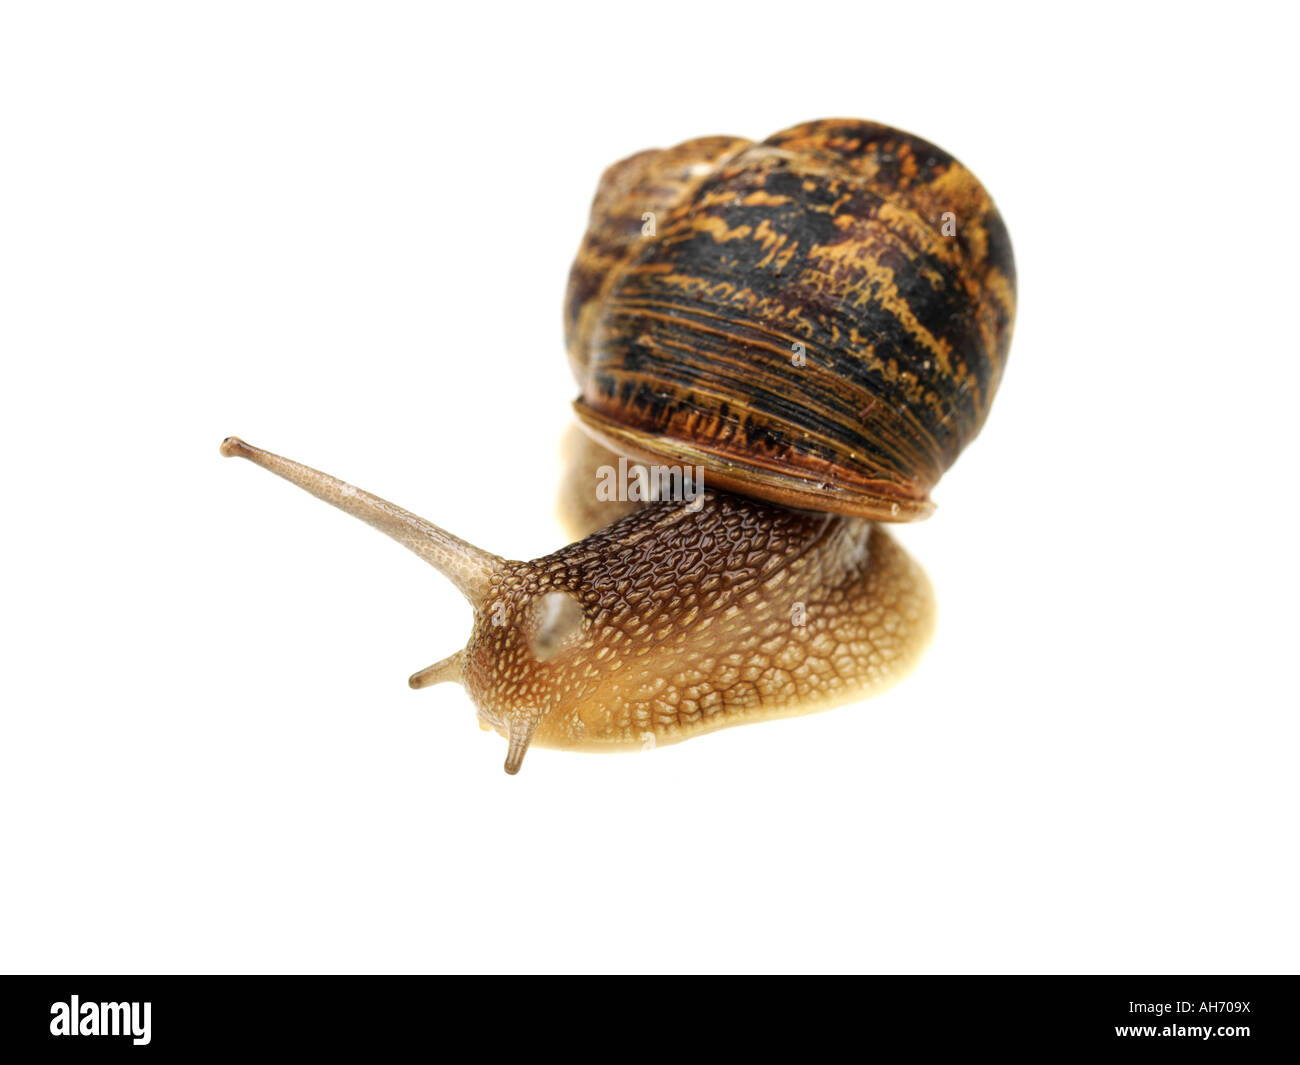 Common Single Slow Moving Garden Snail Isolated Against A White Background With No people And A Clipping Path Stock Photo